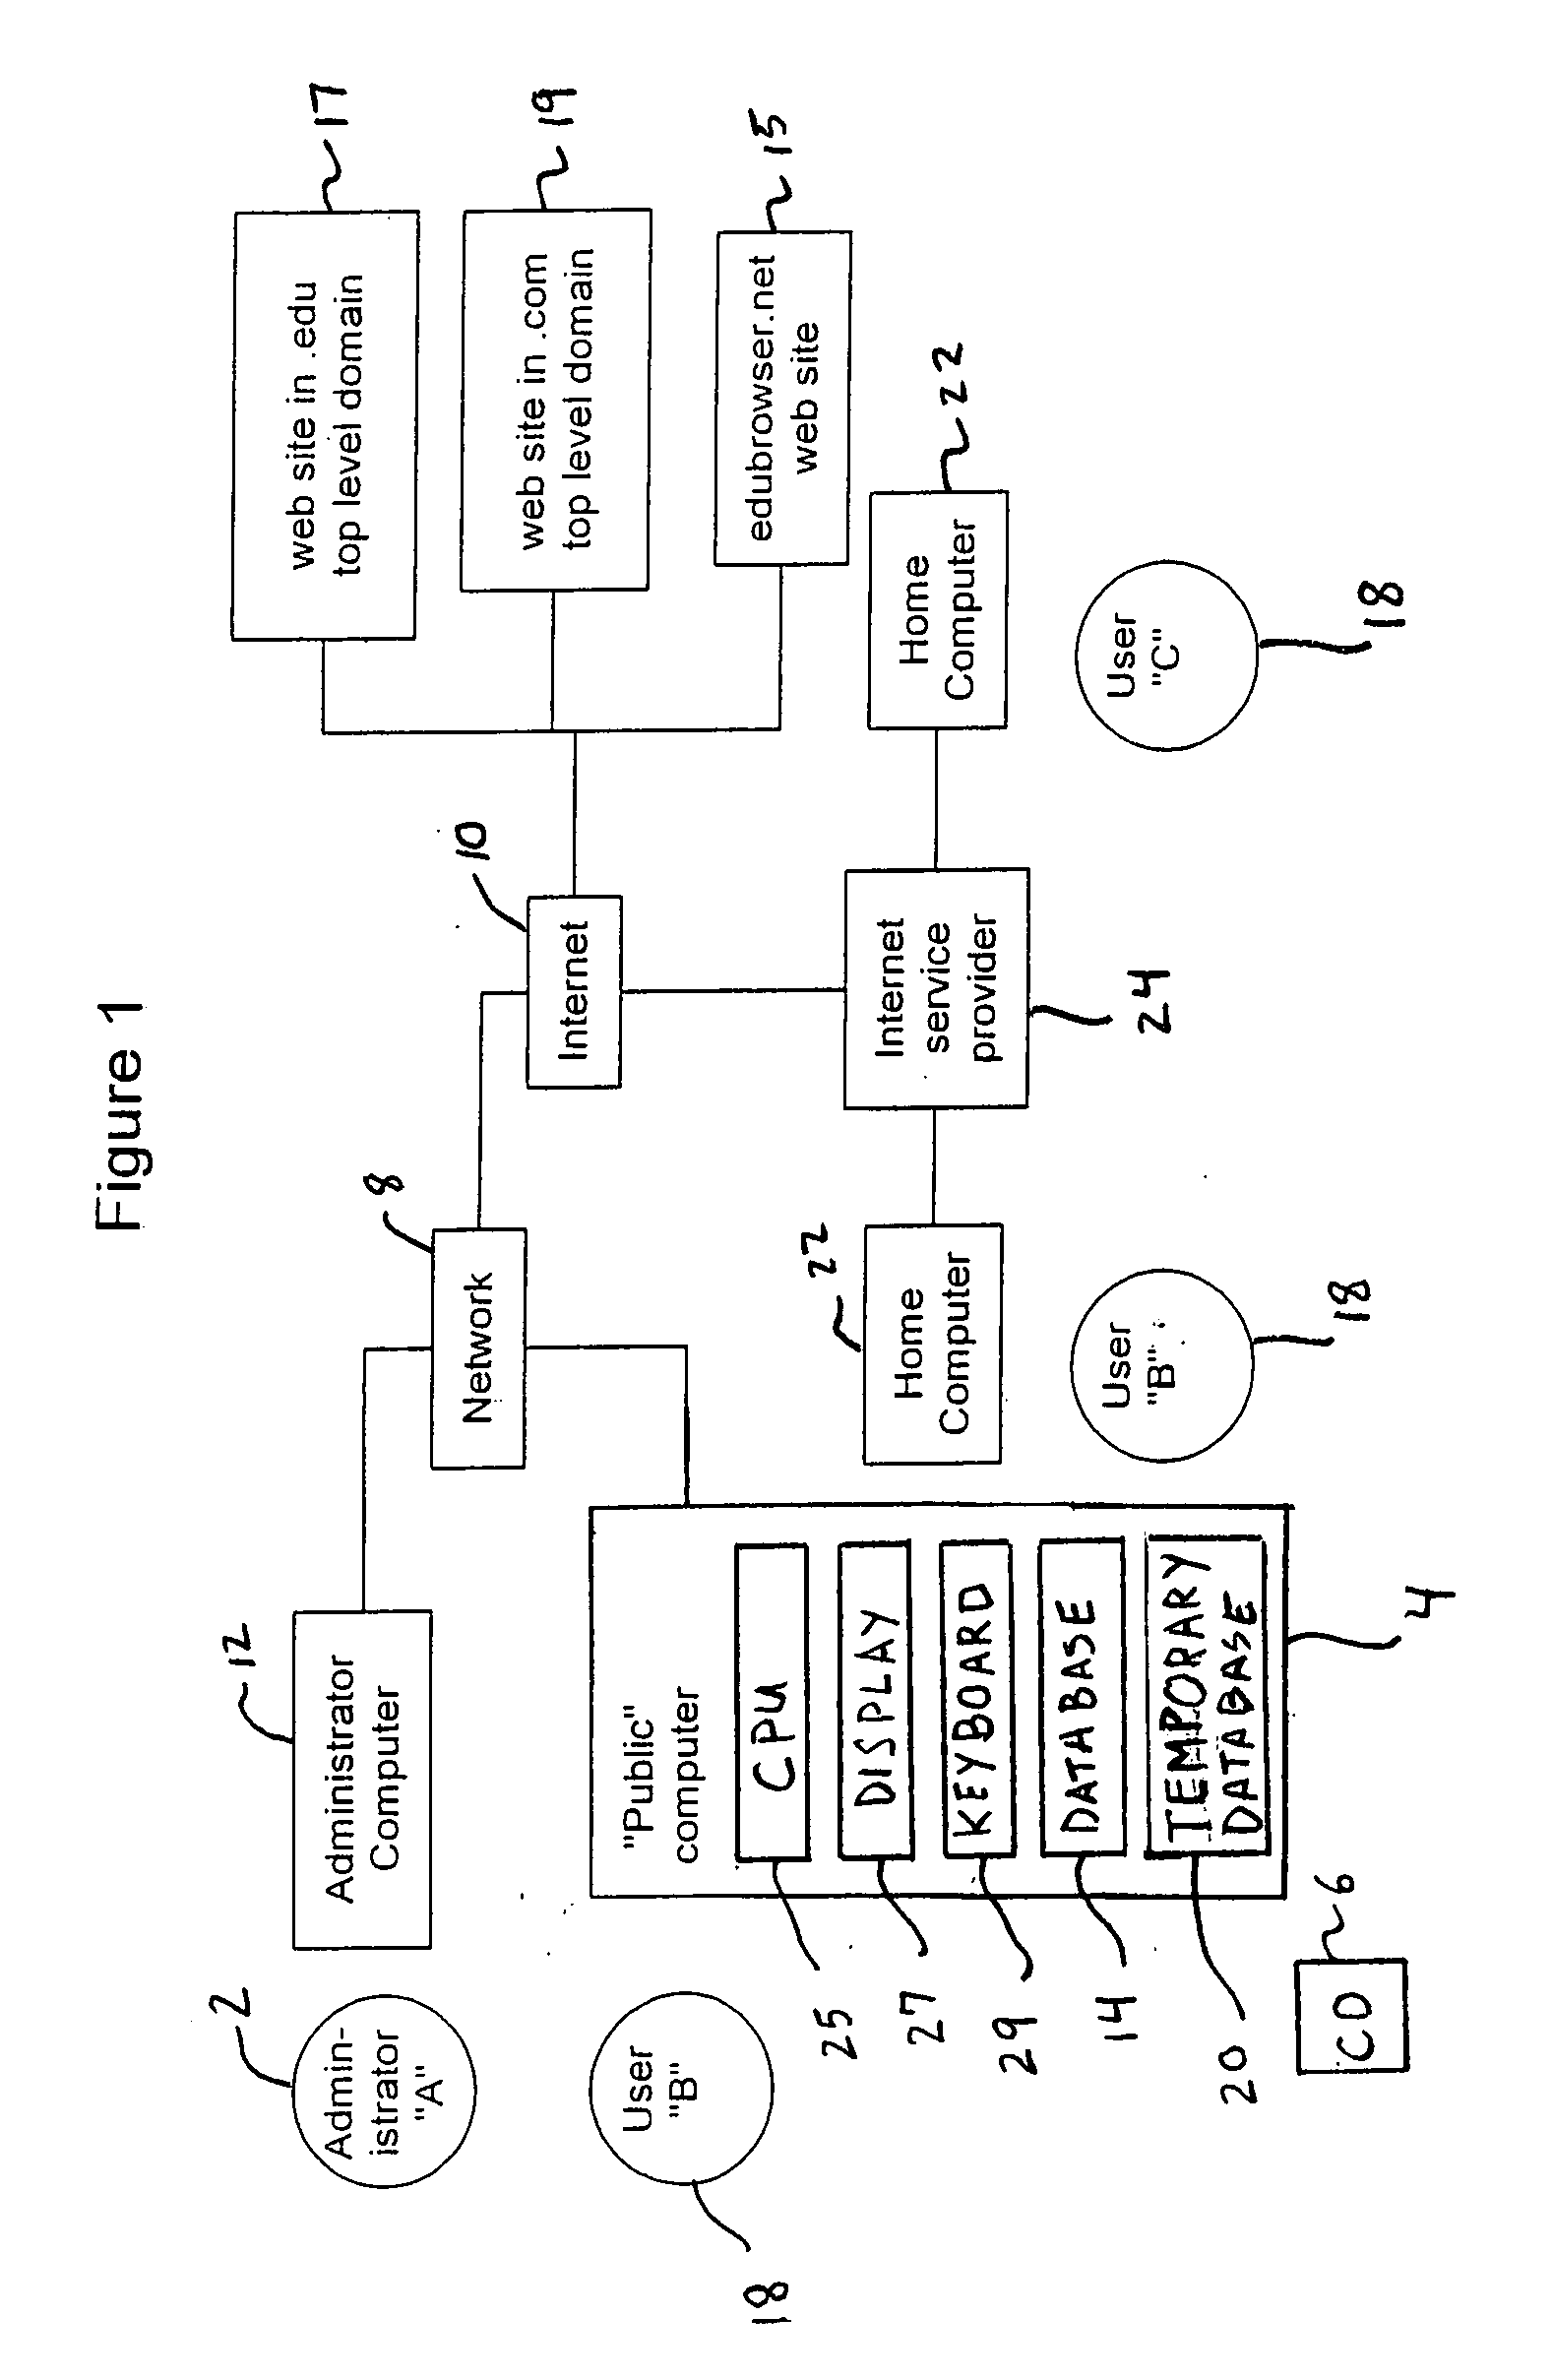 System and method for restricting internet access of a computer